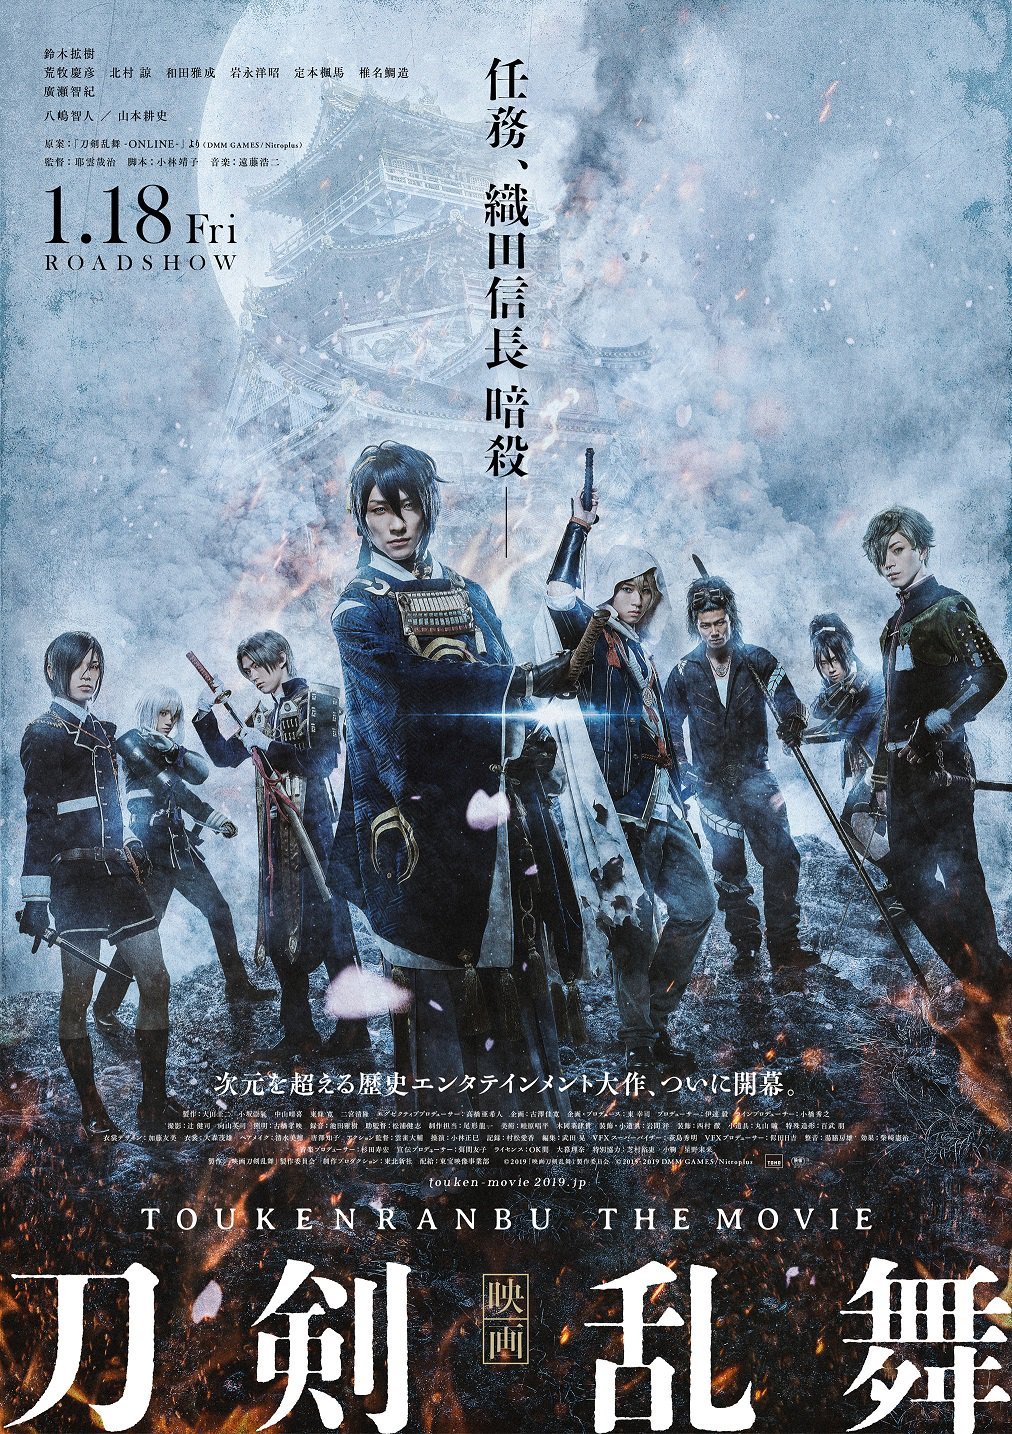 New poster visual for the âTouken Ranbuâ live-action movie. The film will be released on January 18th, 2019. Website: http://touken-movie2019.jp/